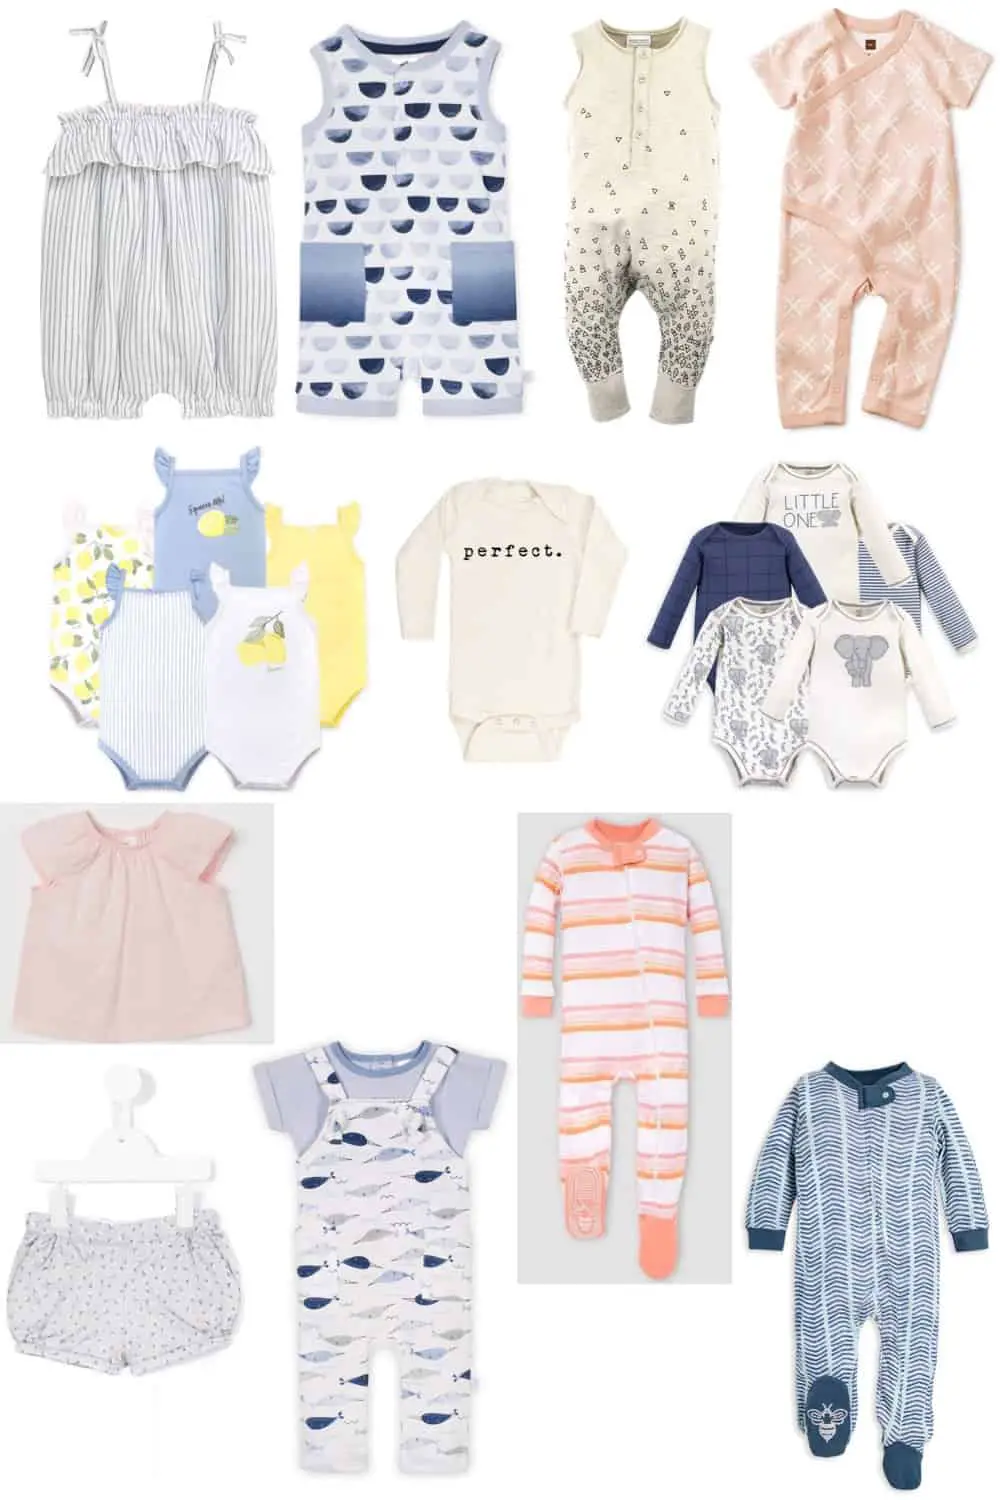 Baby Shower Gifts She’ll Really Use (And Love!) | Thrifted & Taylor'd